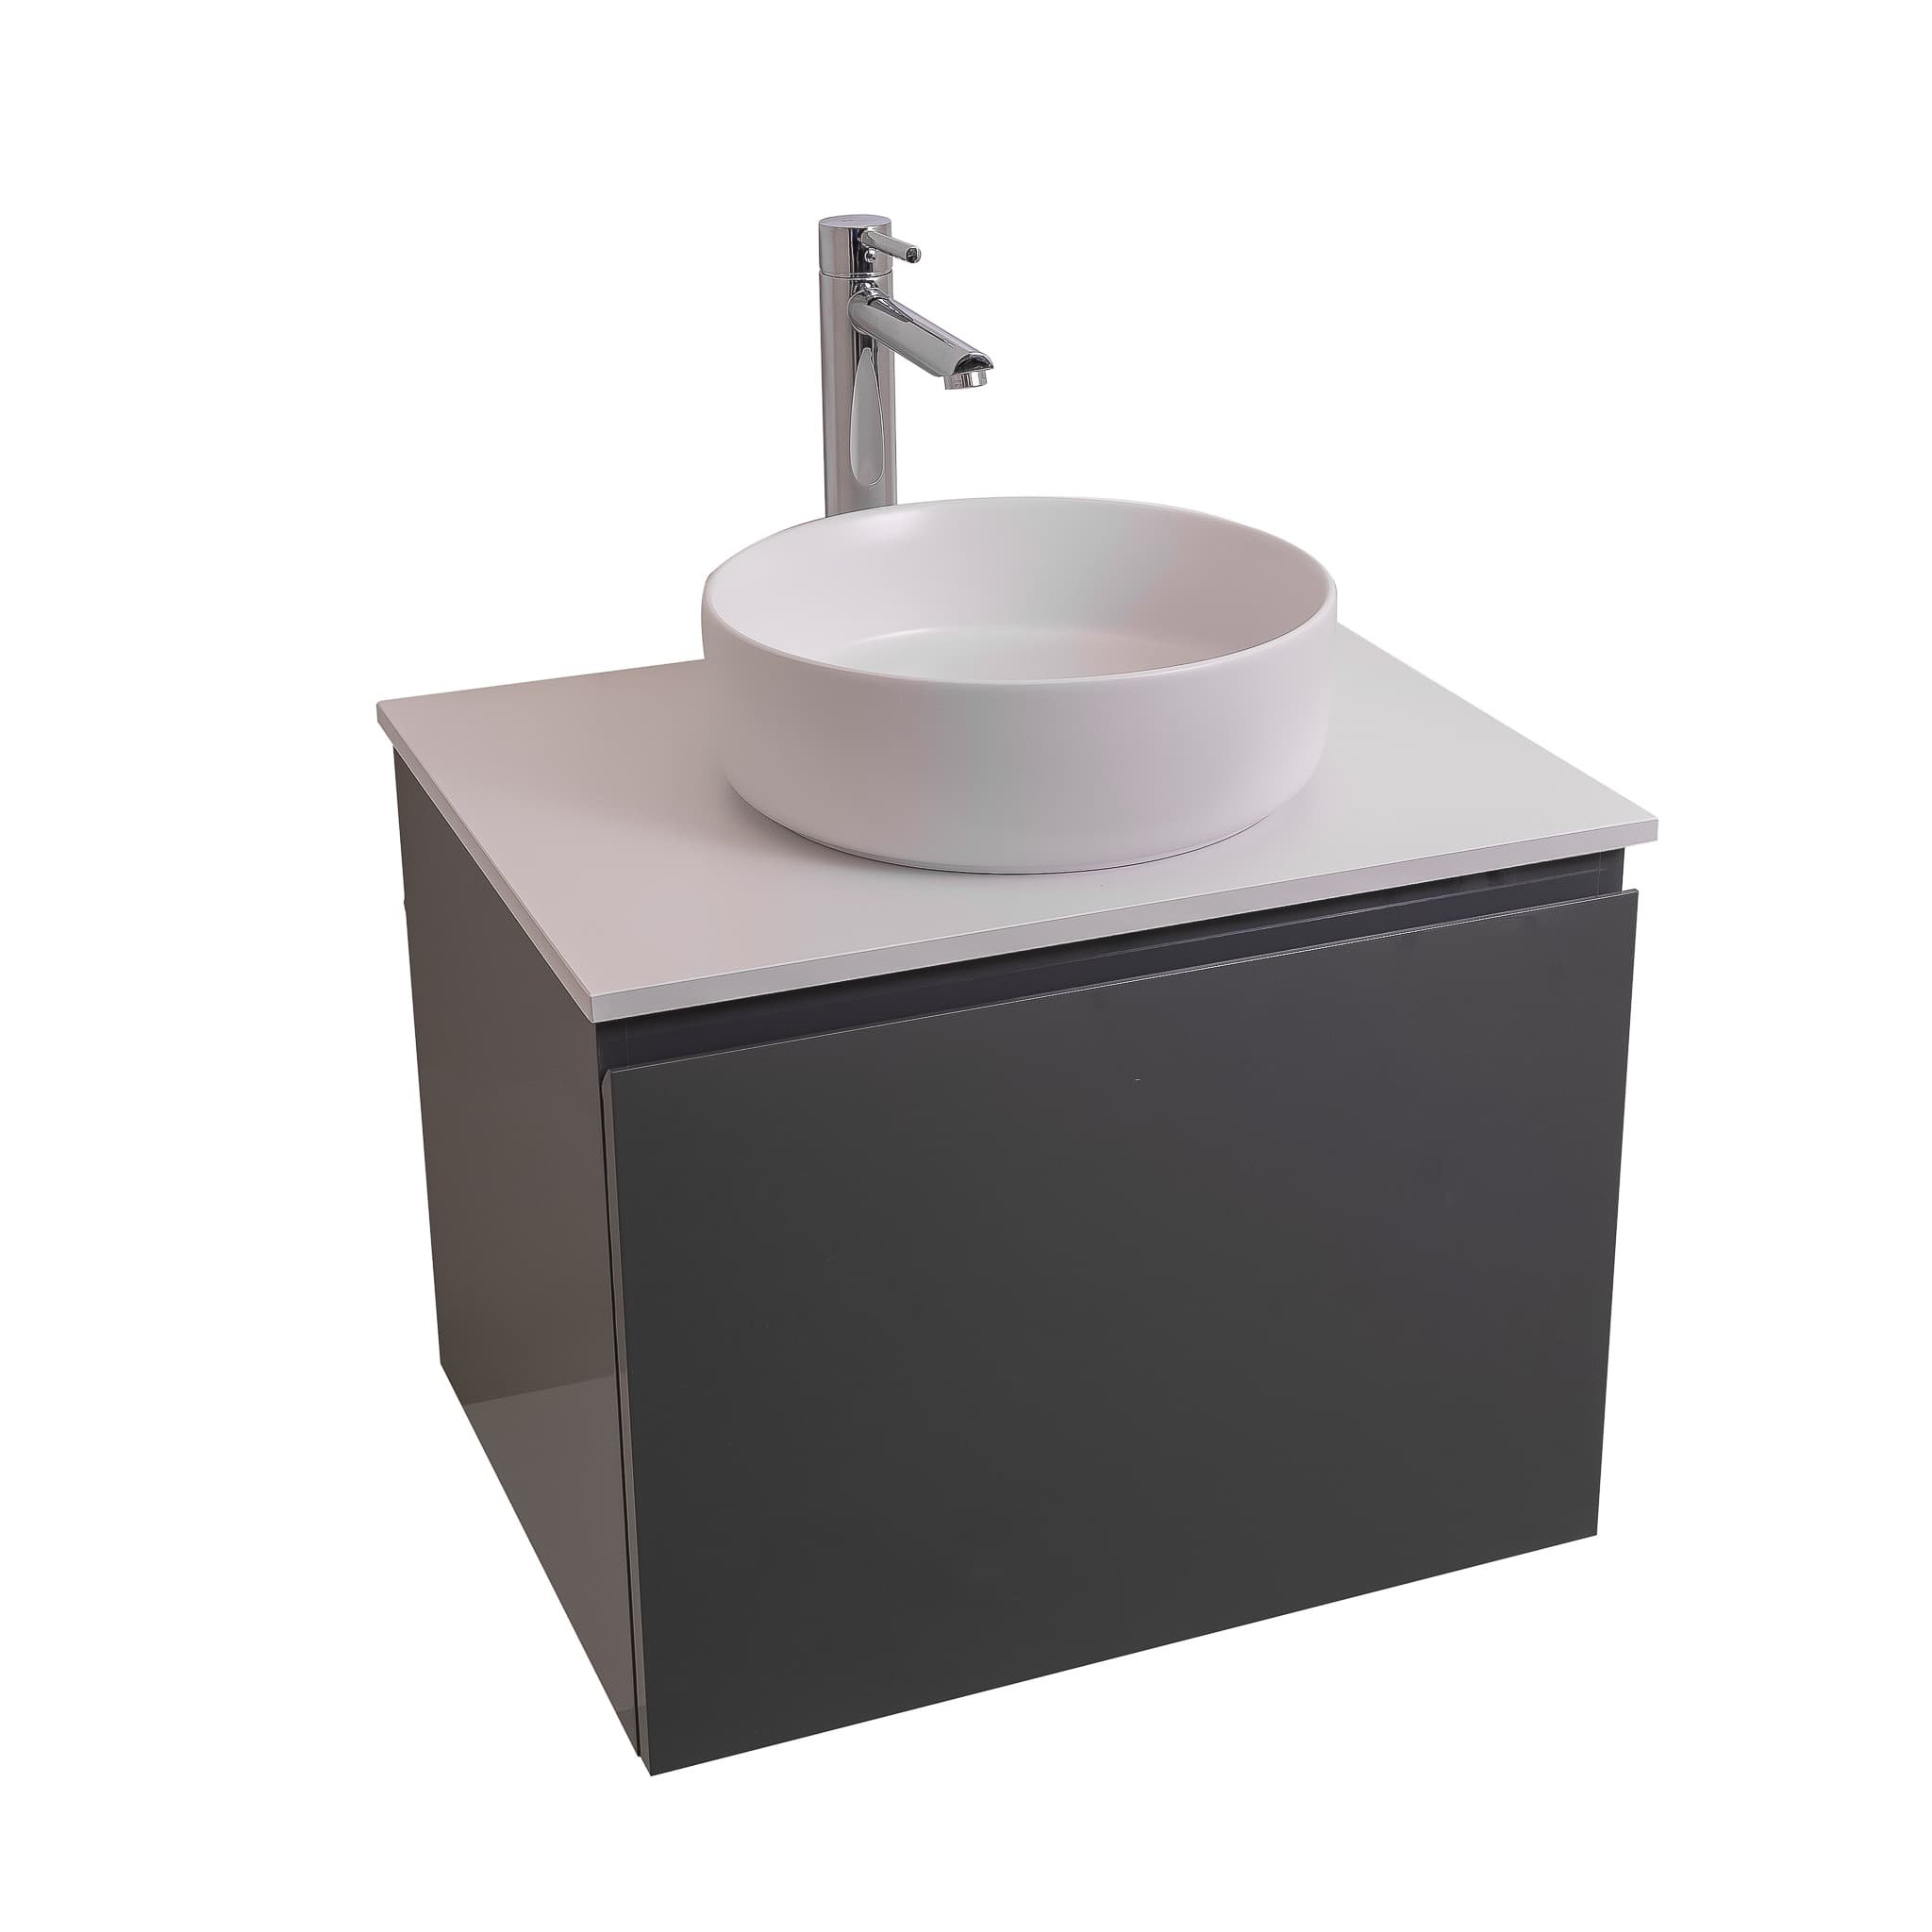 Venice 23.5 Anthracite High Gloss Cabinet, Ares White Top And Ares White Ceramic Basin, Wall Mounted Modern Vanity Set